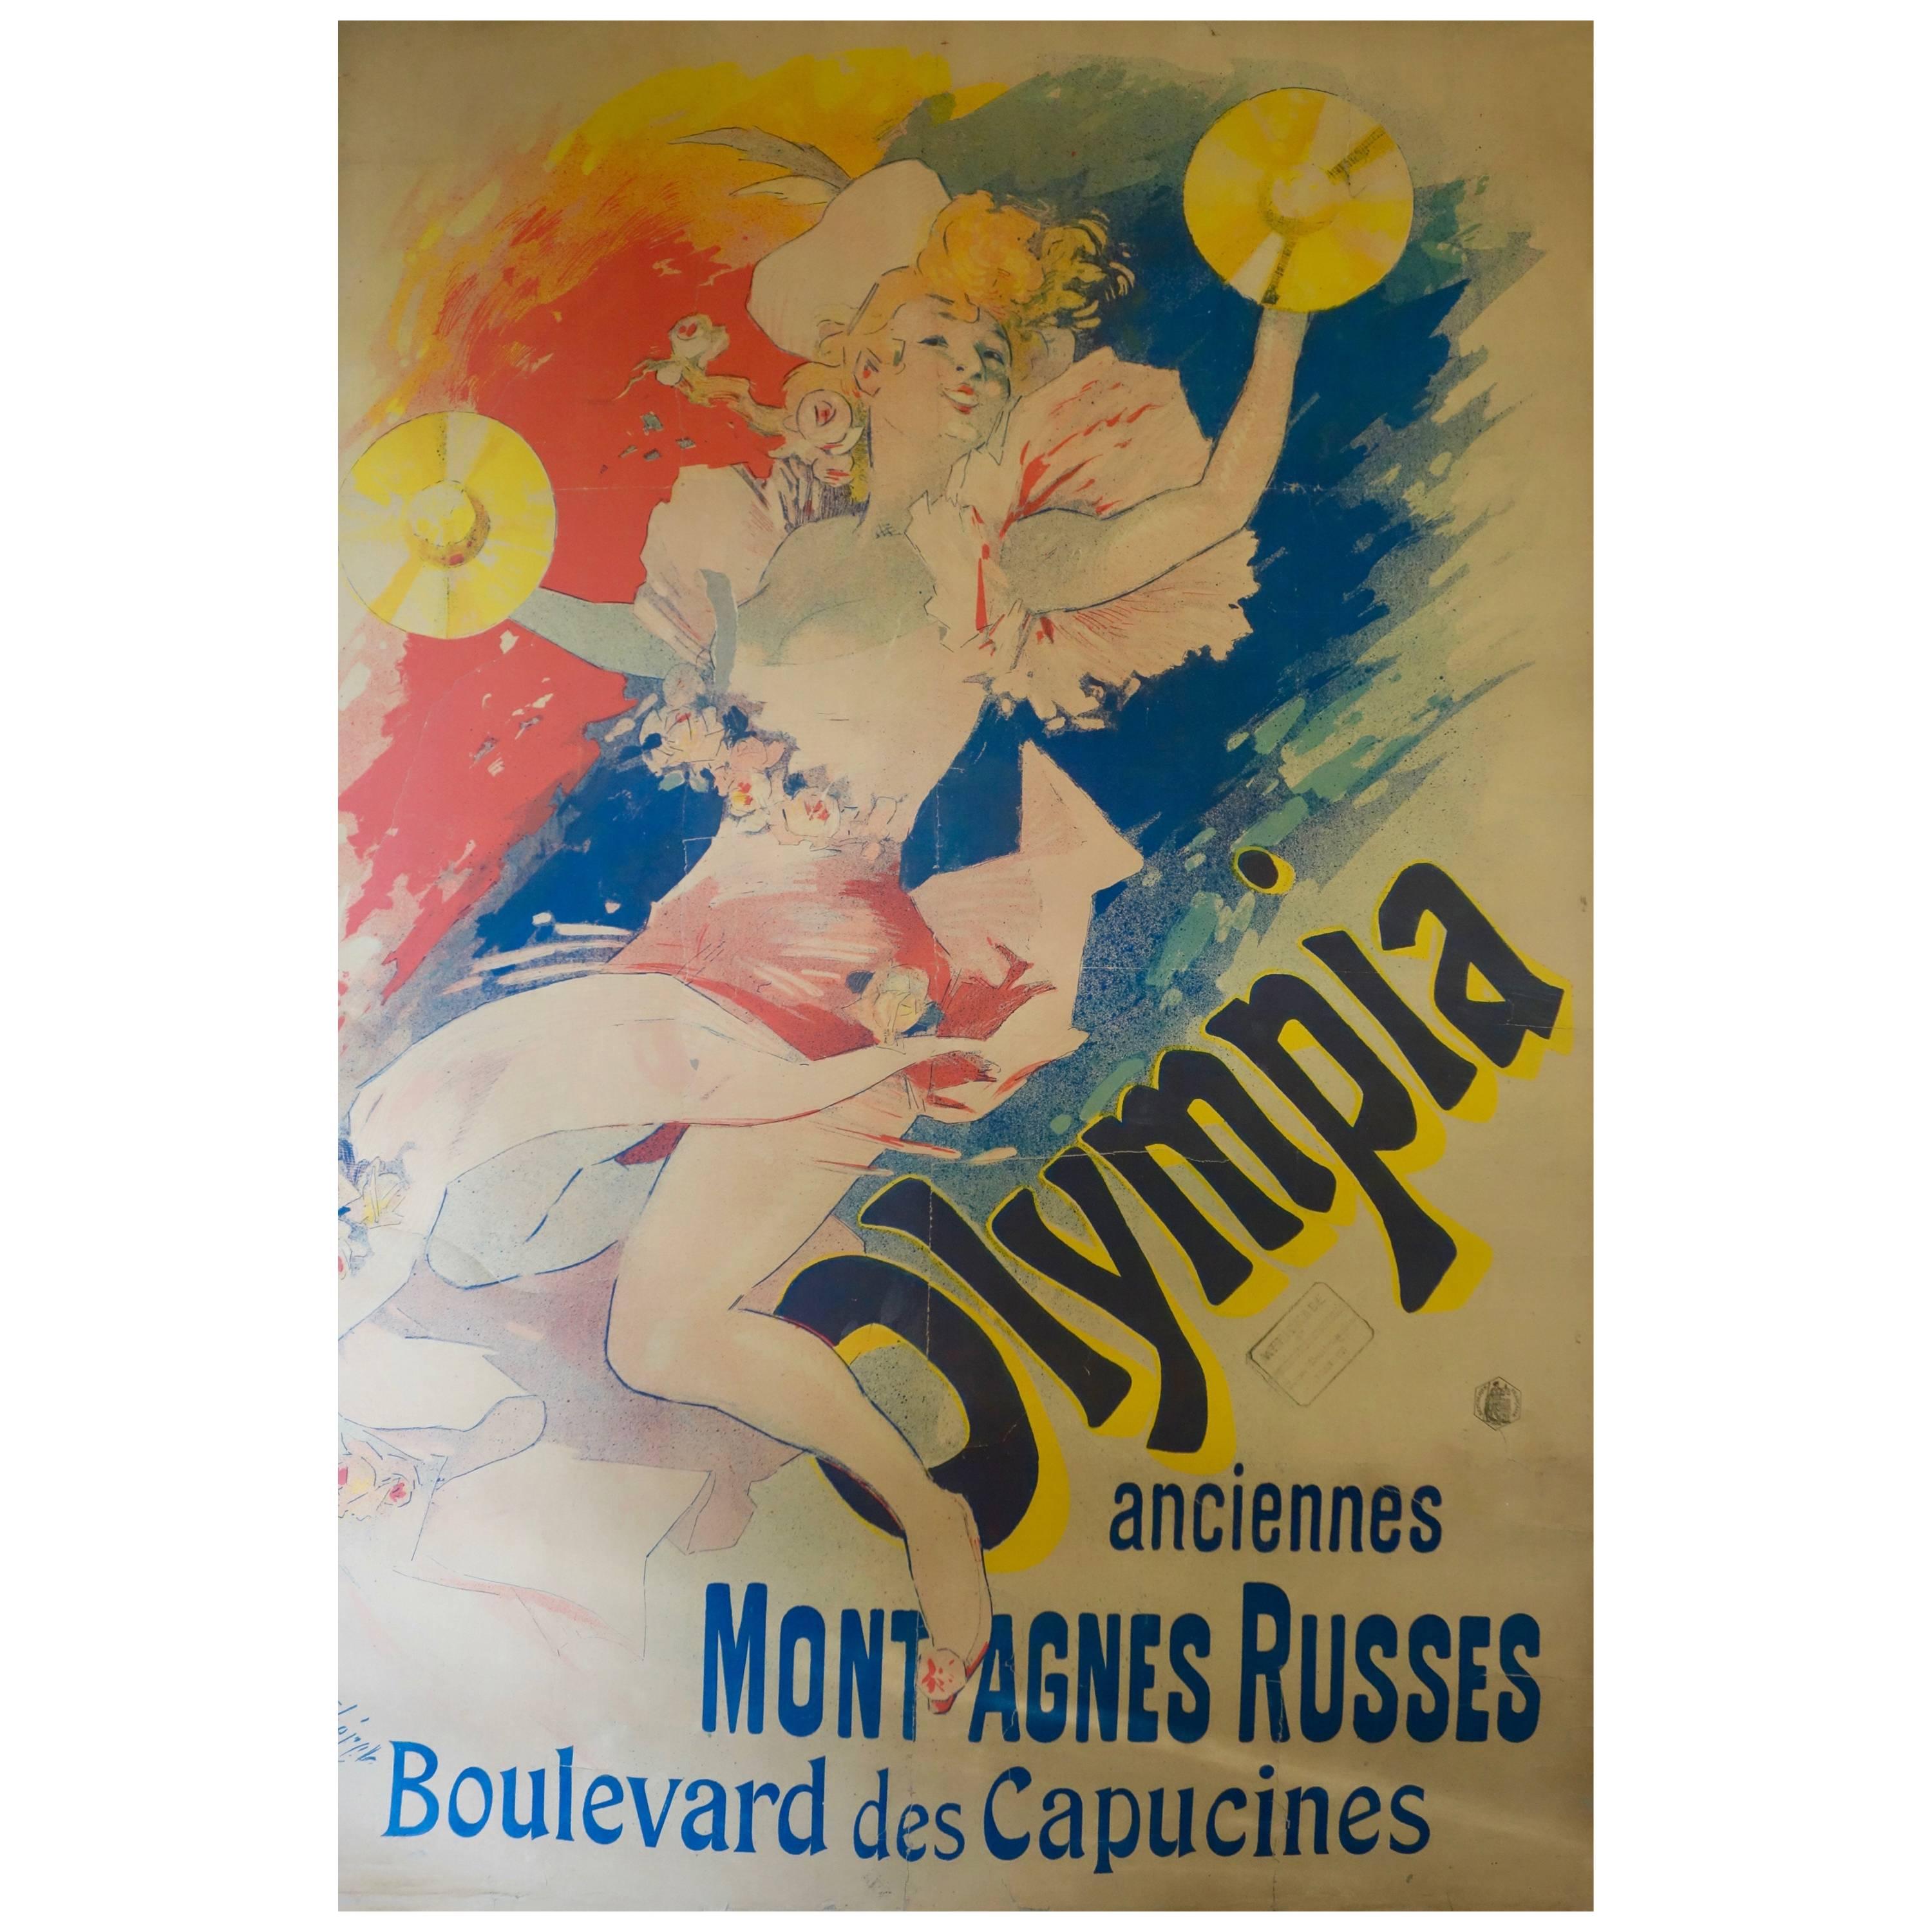 French Color Lithograph "Olympia, Anciennes Montagnes Russes" Jules Chéret, 1892